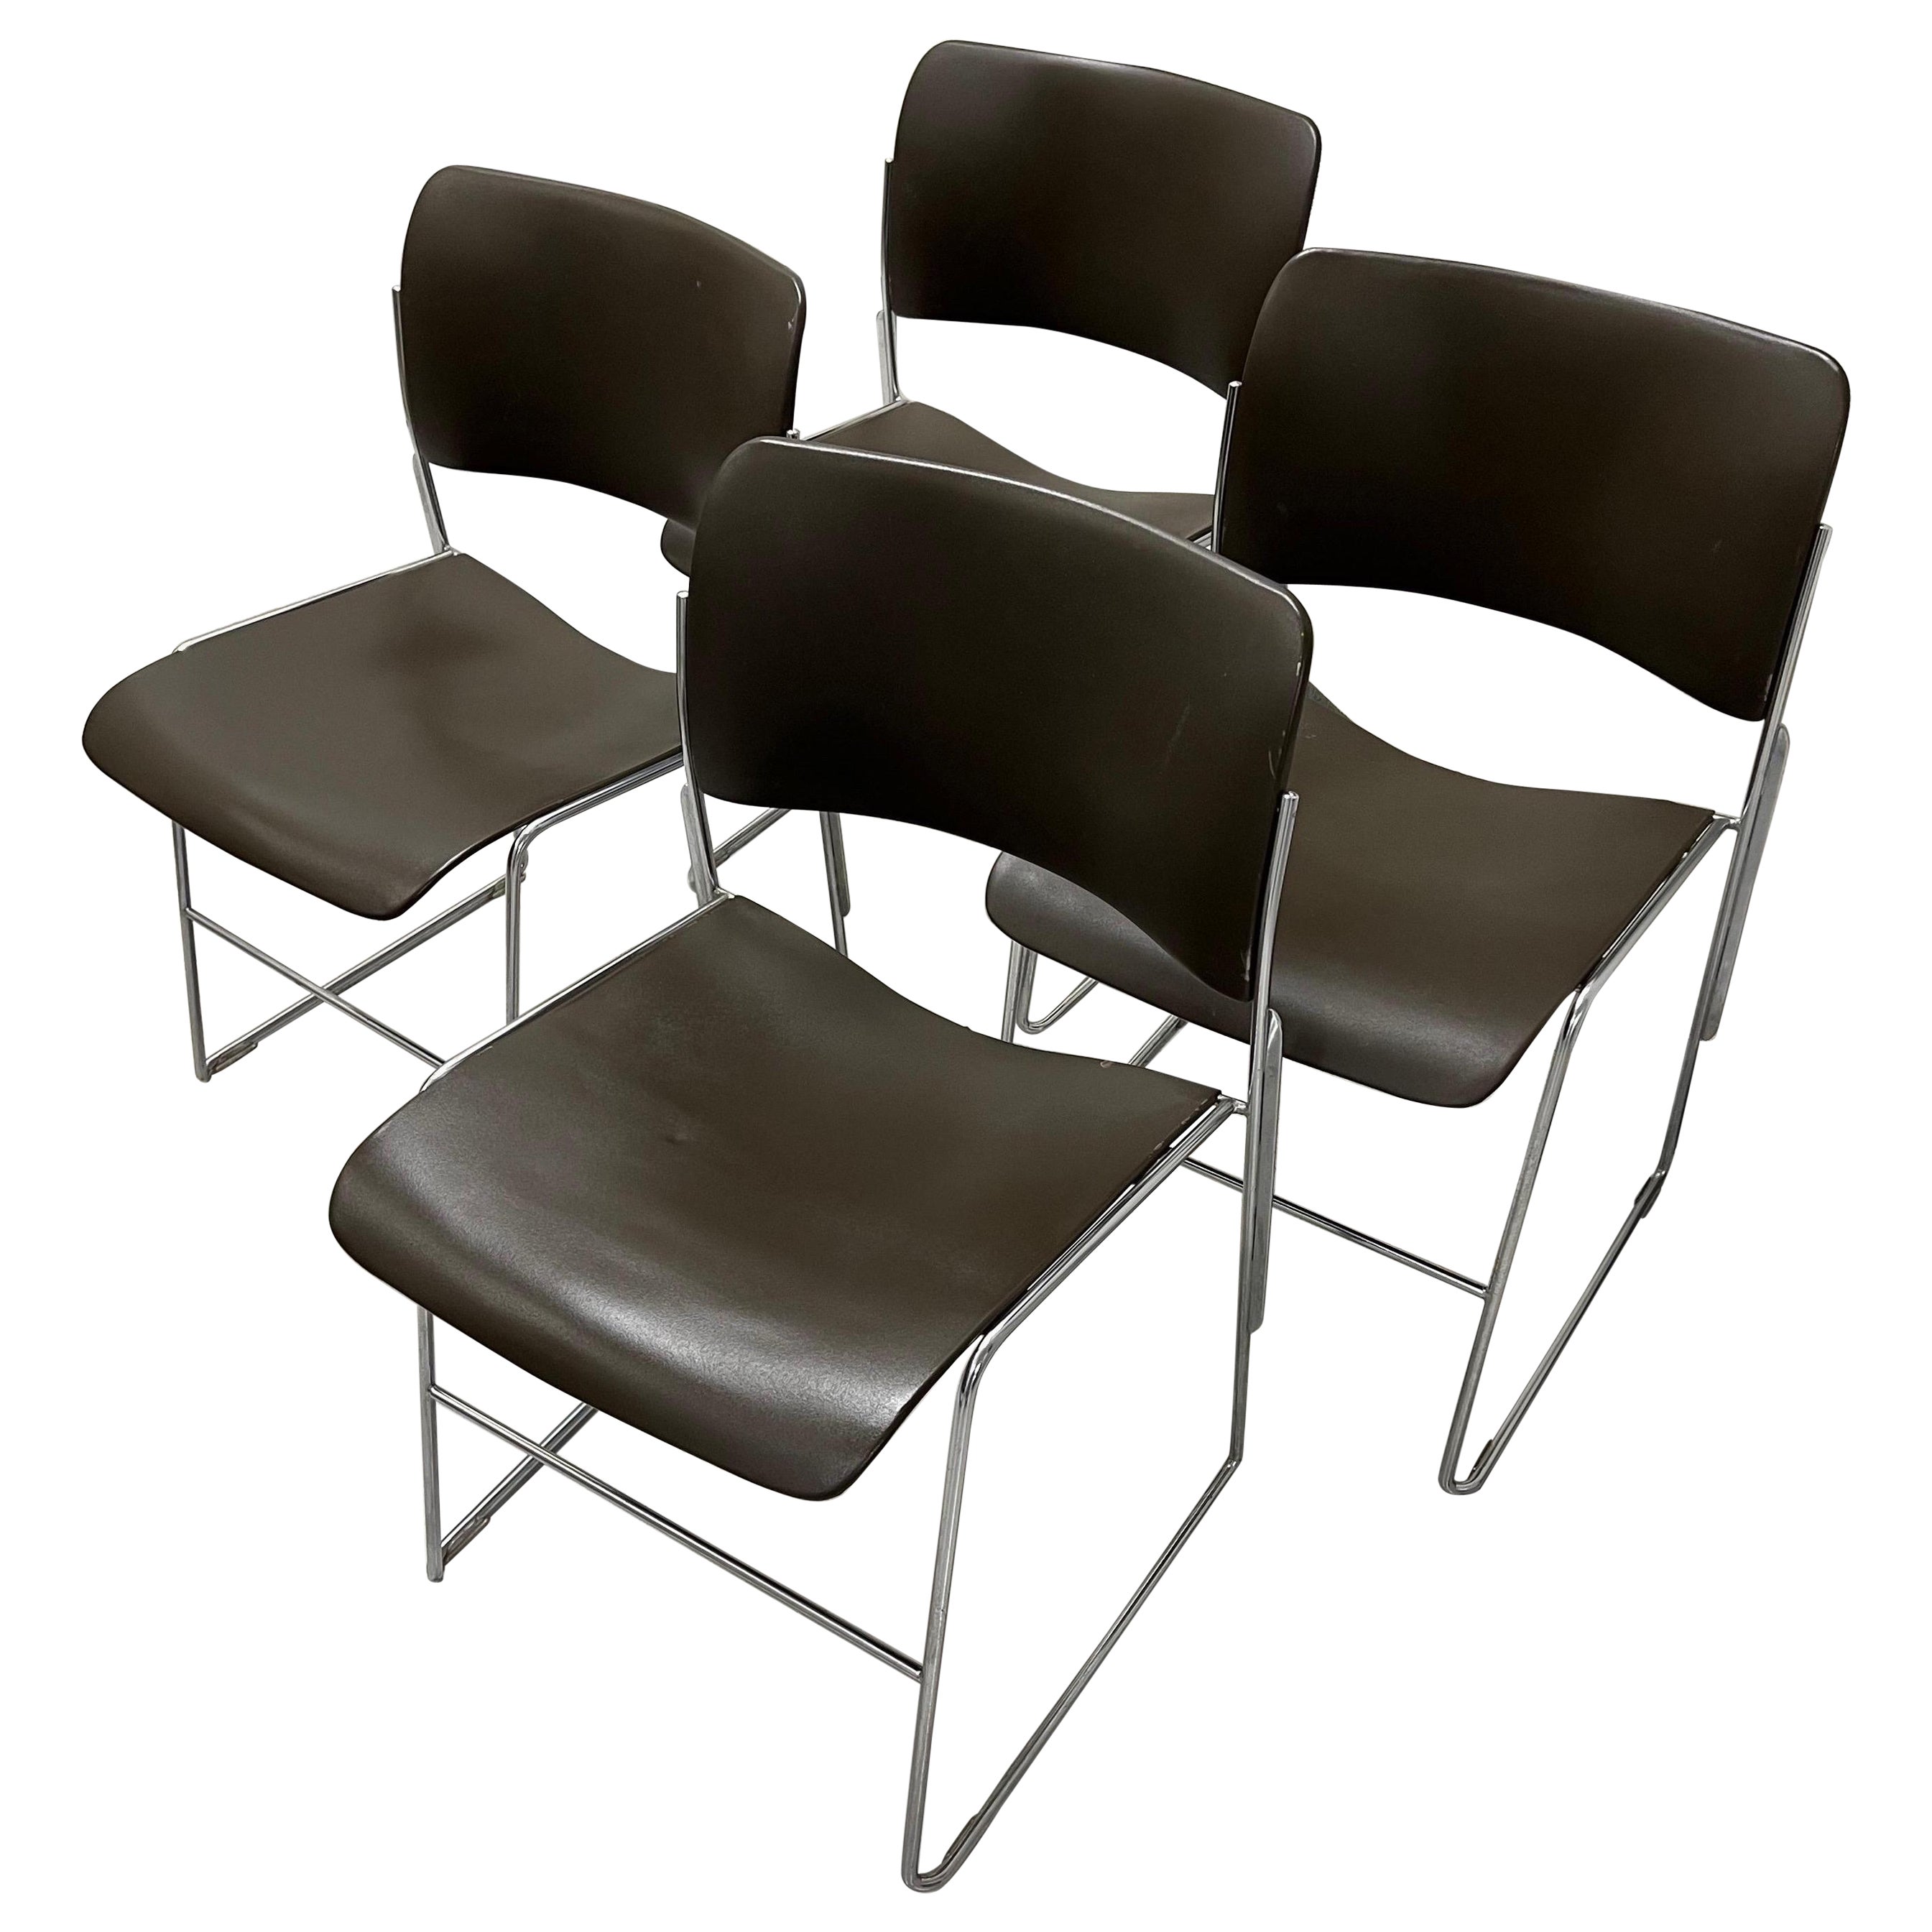 Set of 4 Stackable 40/4 Chairs By David Rowland in Dark Brown For Sale